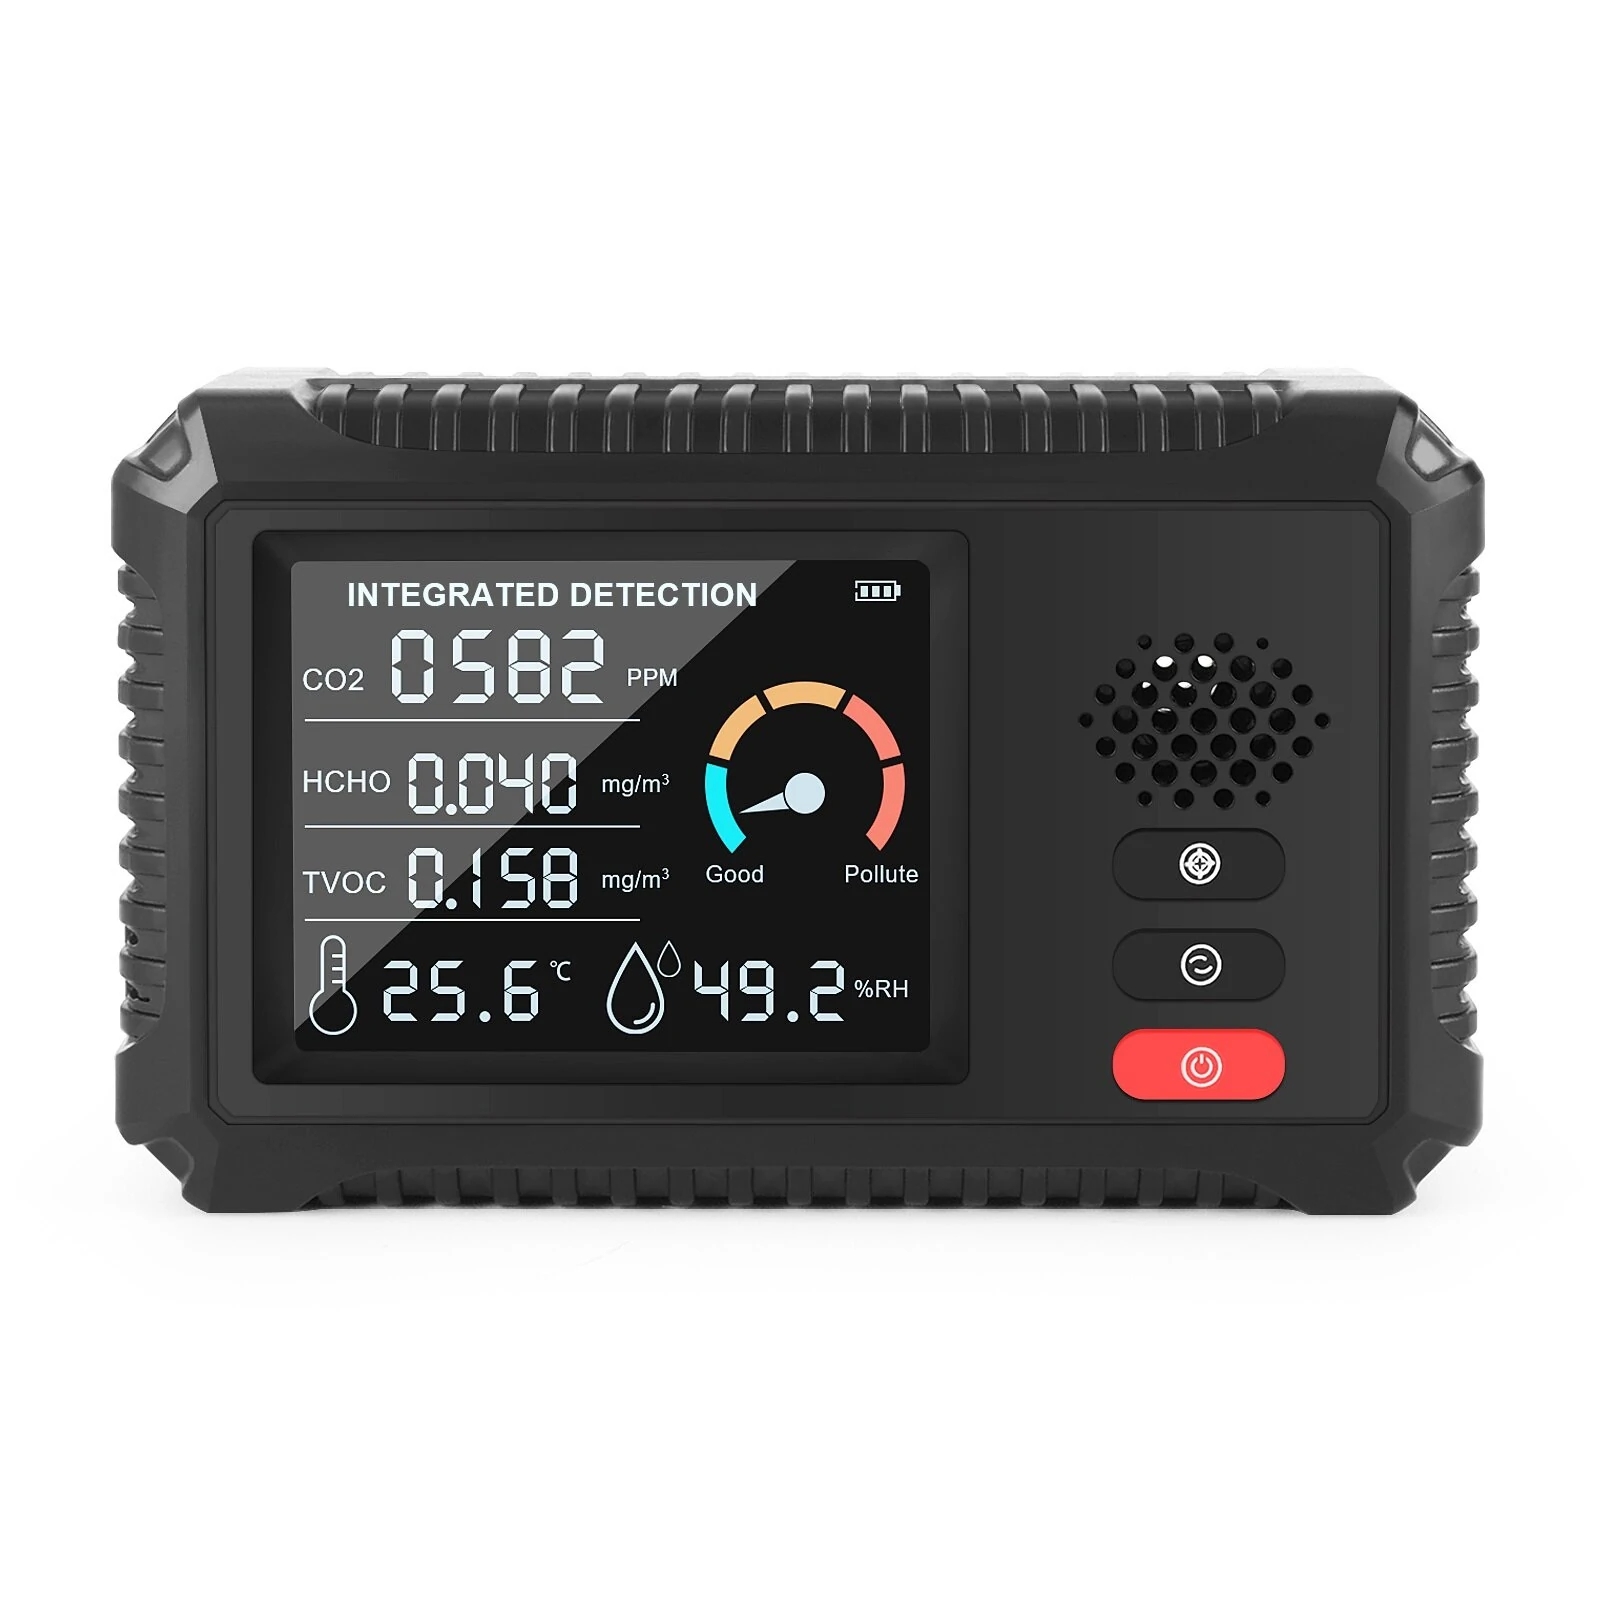 HCHOTVOCPM25PM10-Tester-Formaldehyde-Detector-Real-Time-Data-Monitoring-Multifunctional-Air-Quality--1892301-1